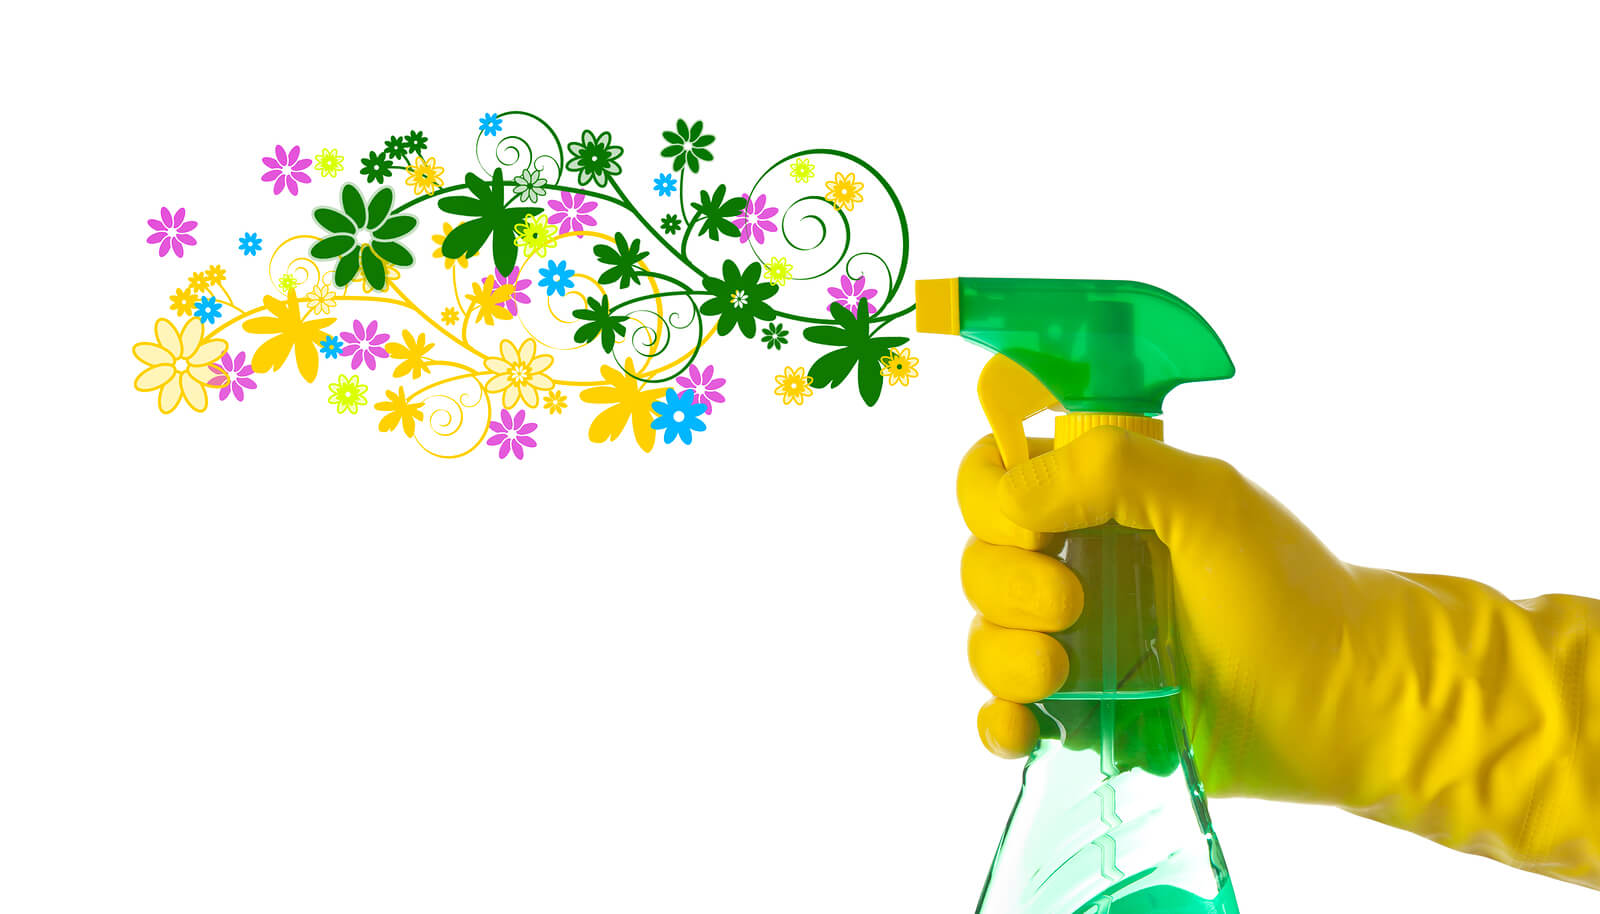 Spring Cleaning: The Added Benefits of a Clean Home